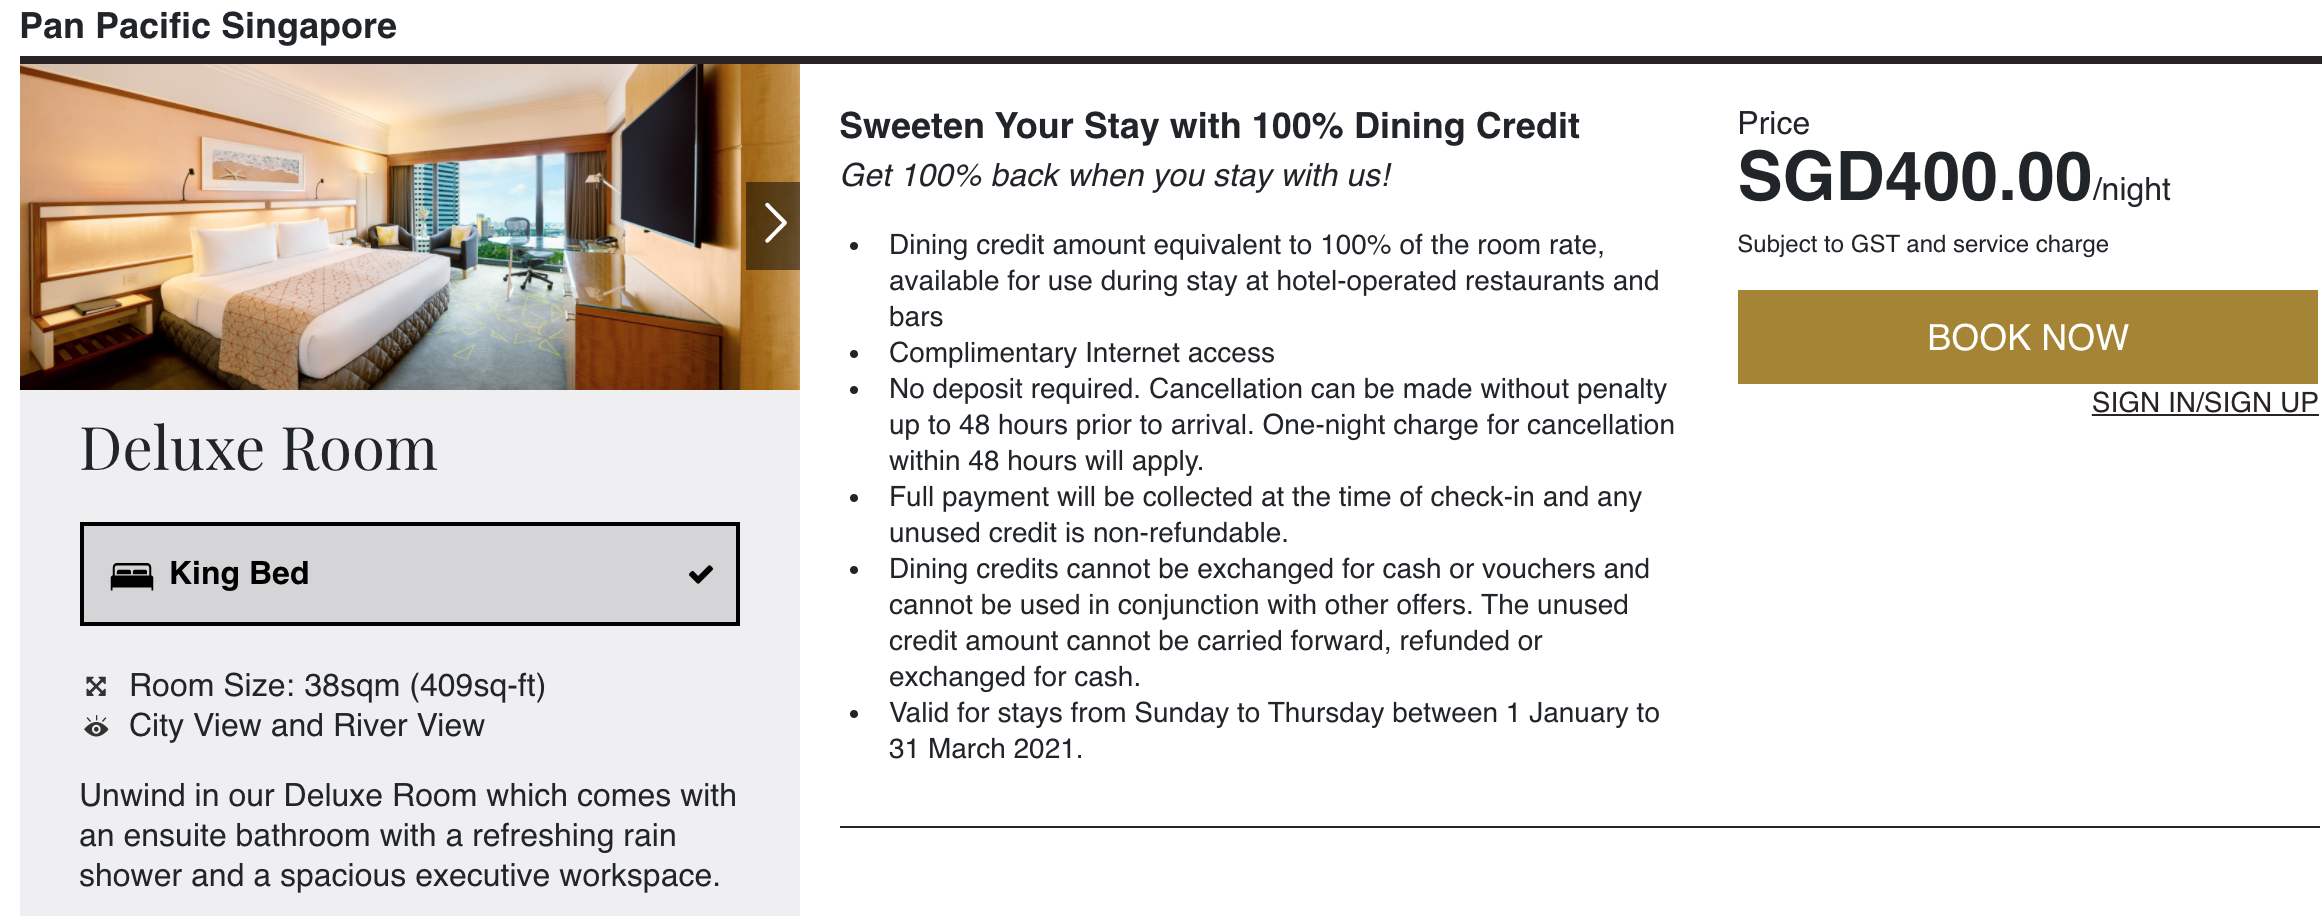 Pan Pacific Hotels S Pore Gets 100 Room Fee Back In Dining Credit For Workday Until March 31 2021